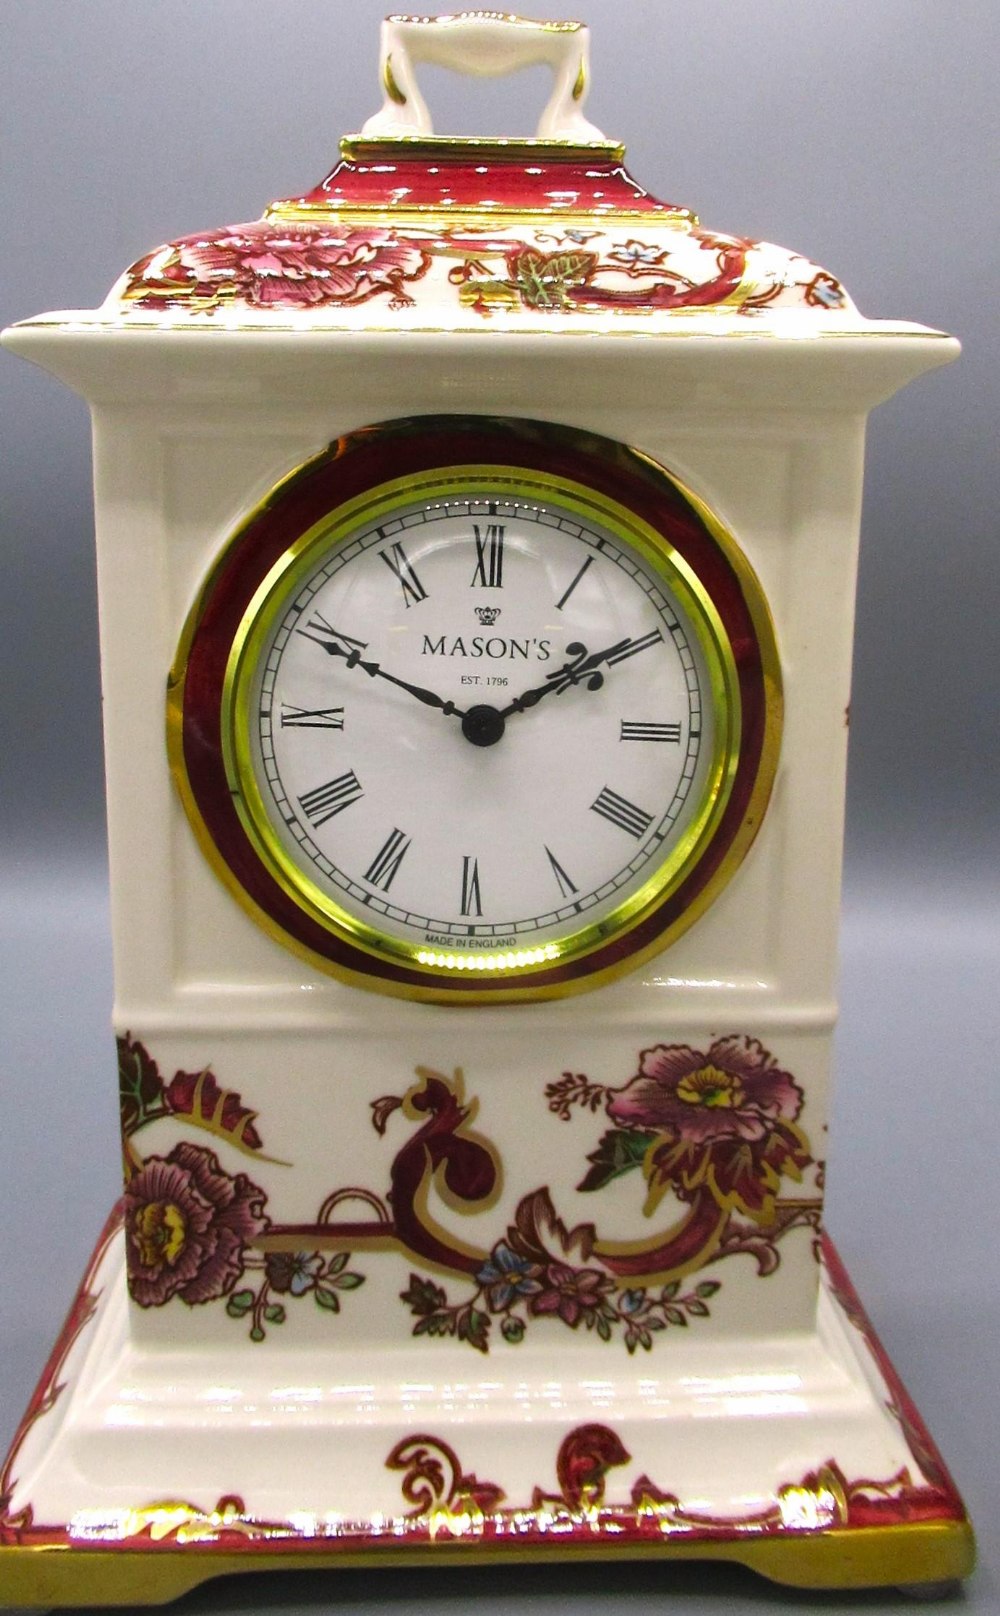 Mason's red Mandalay mantel time piece in the form of C18th bracket clock, H25cm, Mason's red - Image 2 of 2